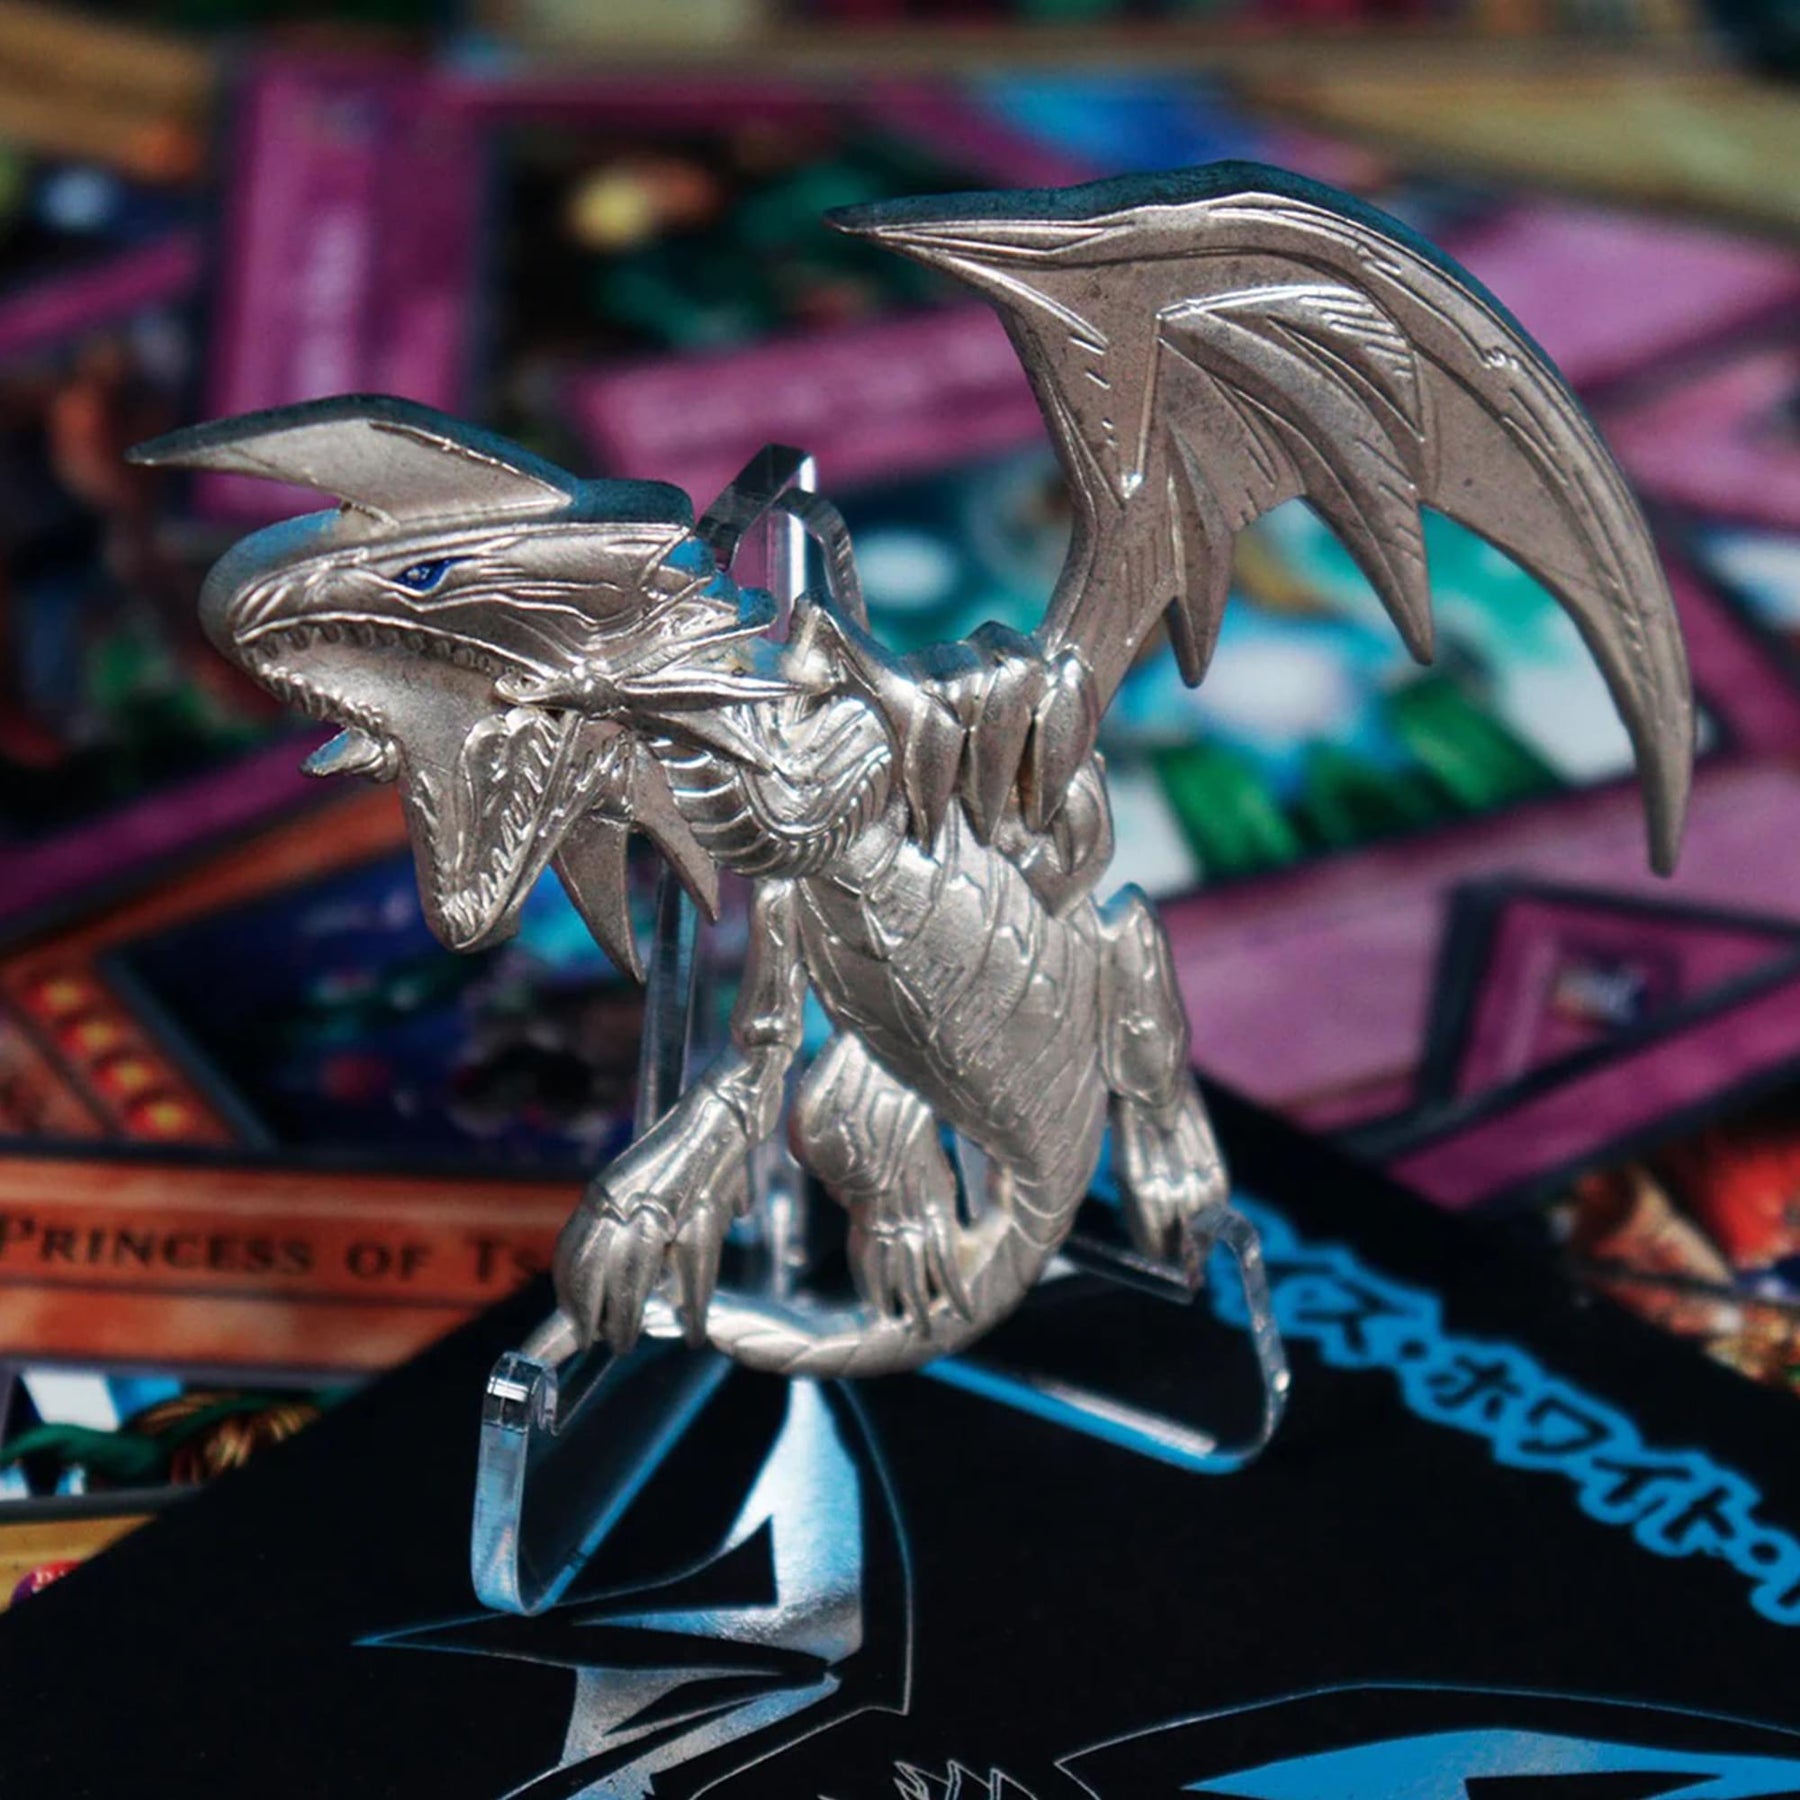 Yu-Gi-Oh! Limited Edition .999 Silver Plated Pin Badge | Blue Eyes White Dragon